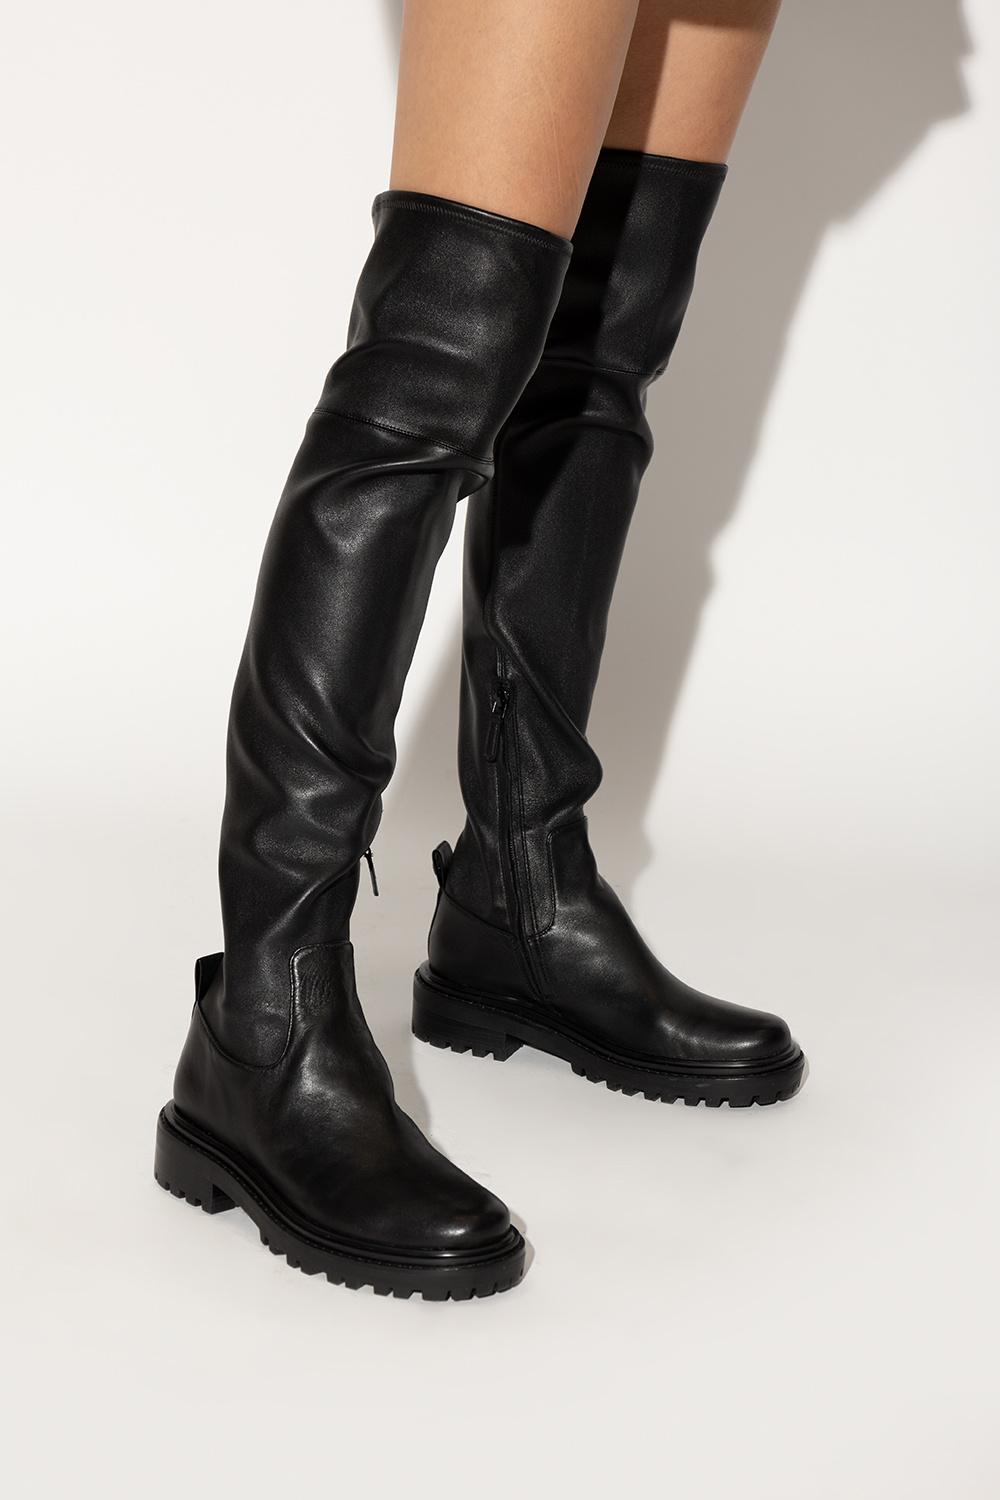 Tory Burch 'utlility Lug' Over-the-knee Boots in Black | Lyst